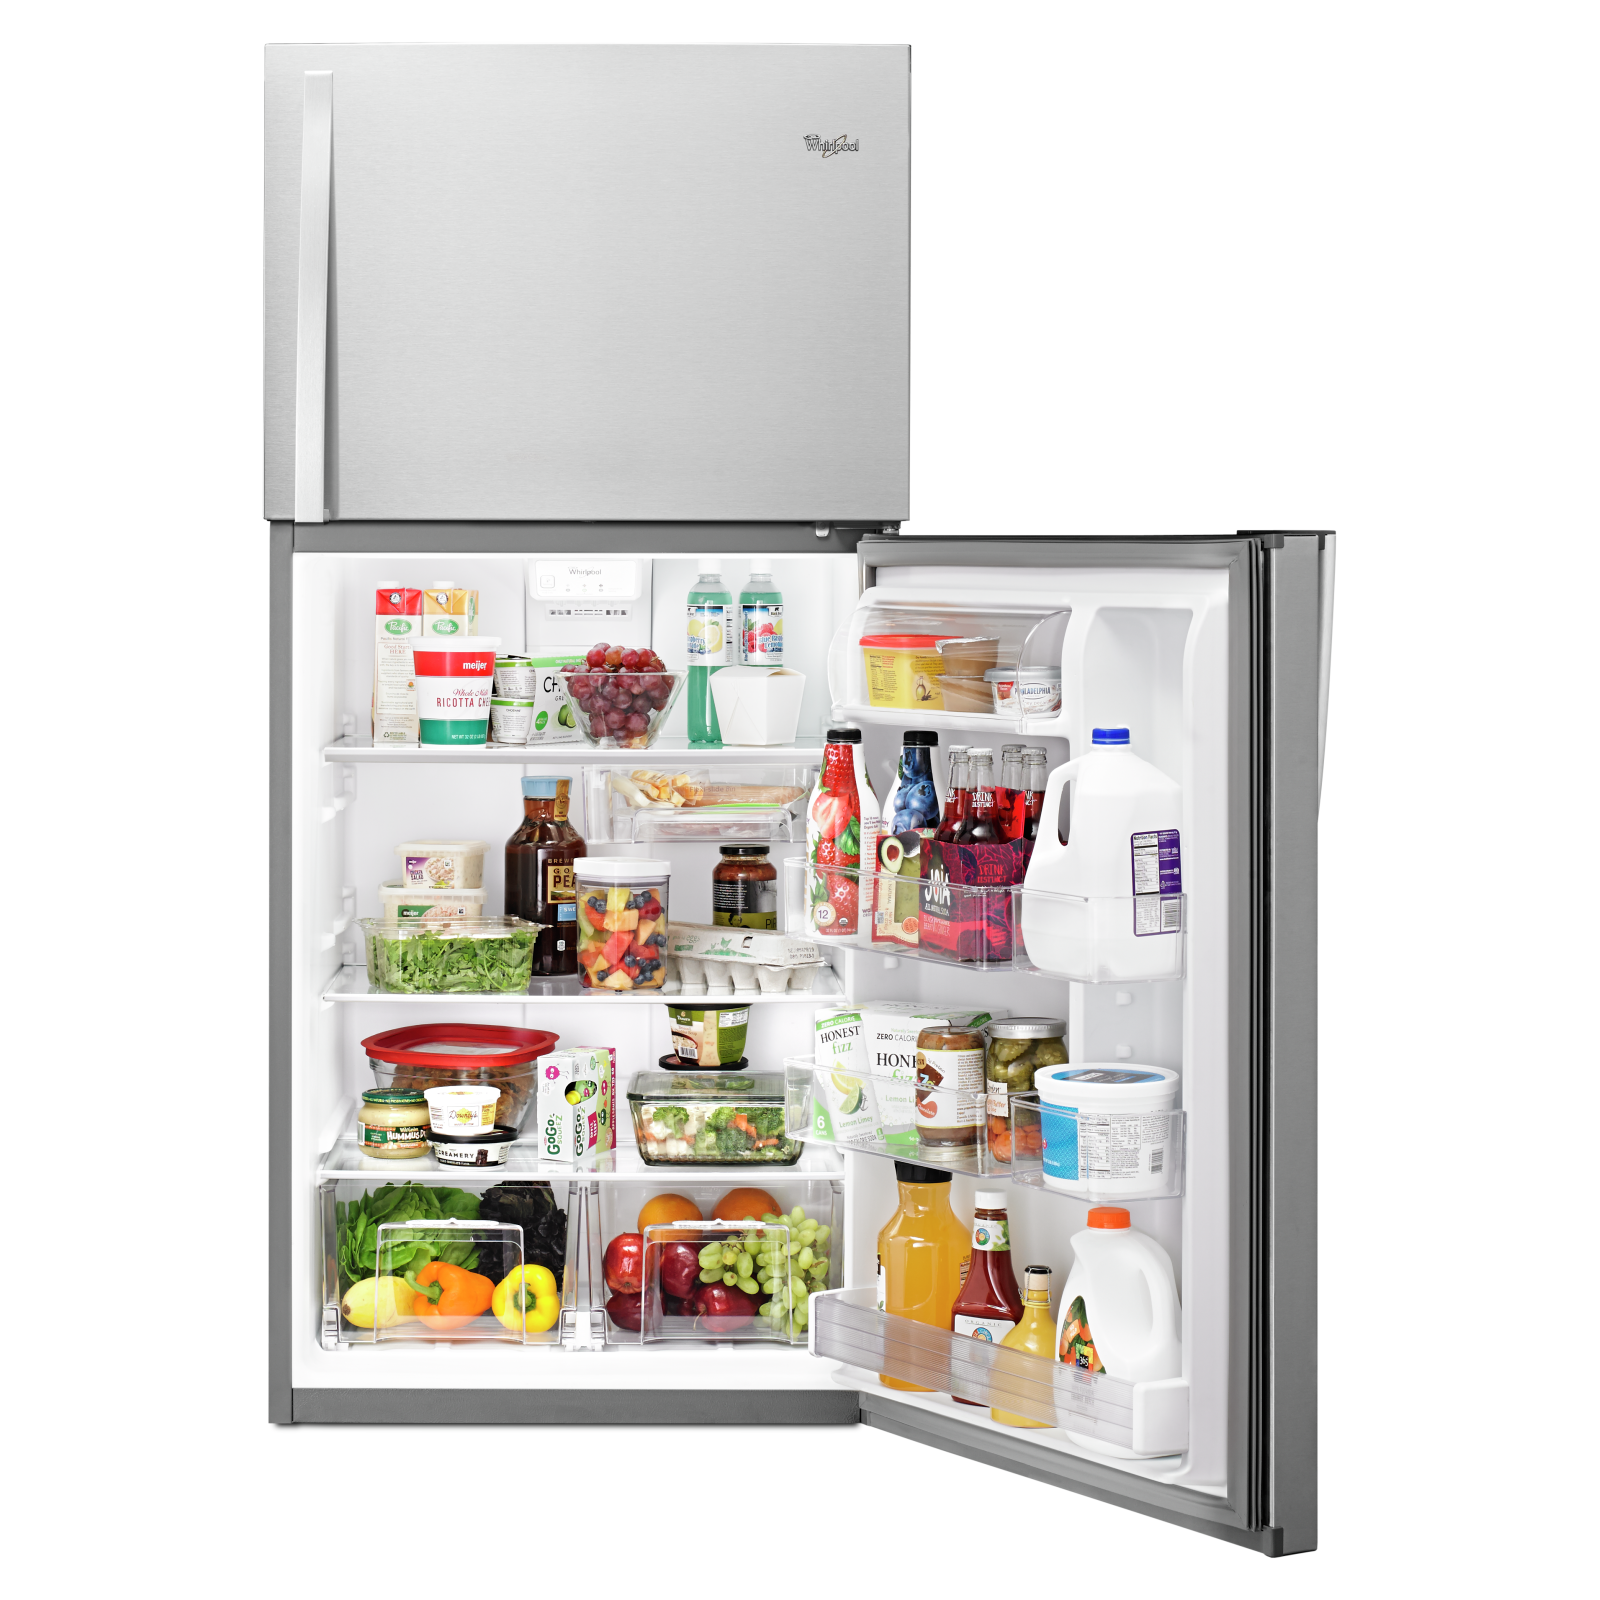 Whirlpool - 29.775 Inch 19.23 cu. ft Top Mount Refrigerator in Stainless - WRT519SZDM